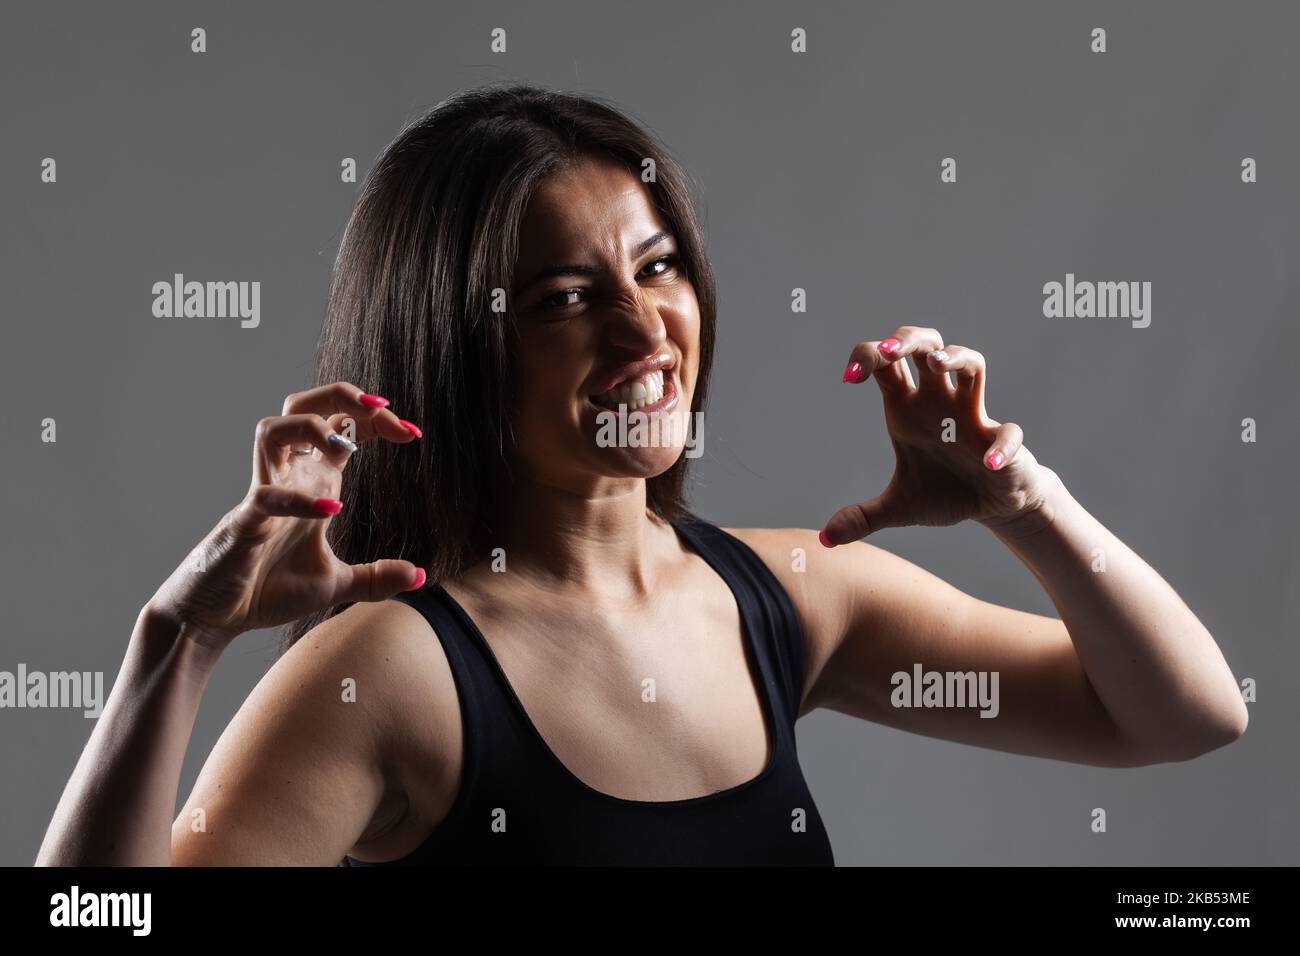 studio portrait of a beautiful angry brunette girl making hand gestures Stock Photo